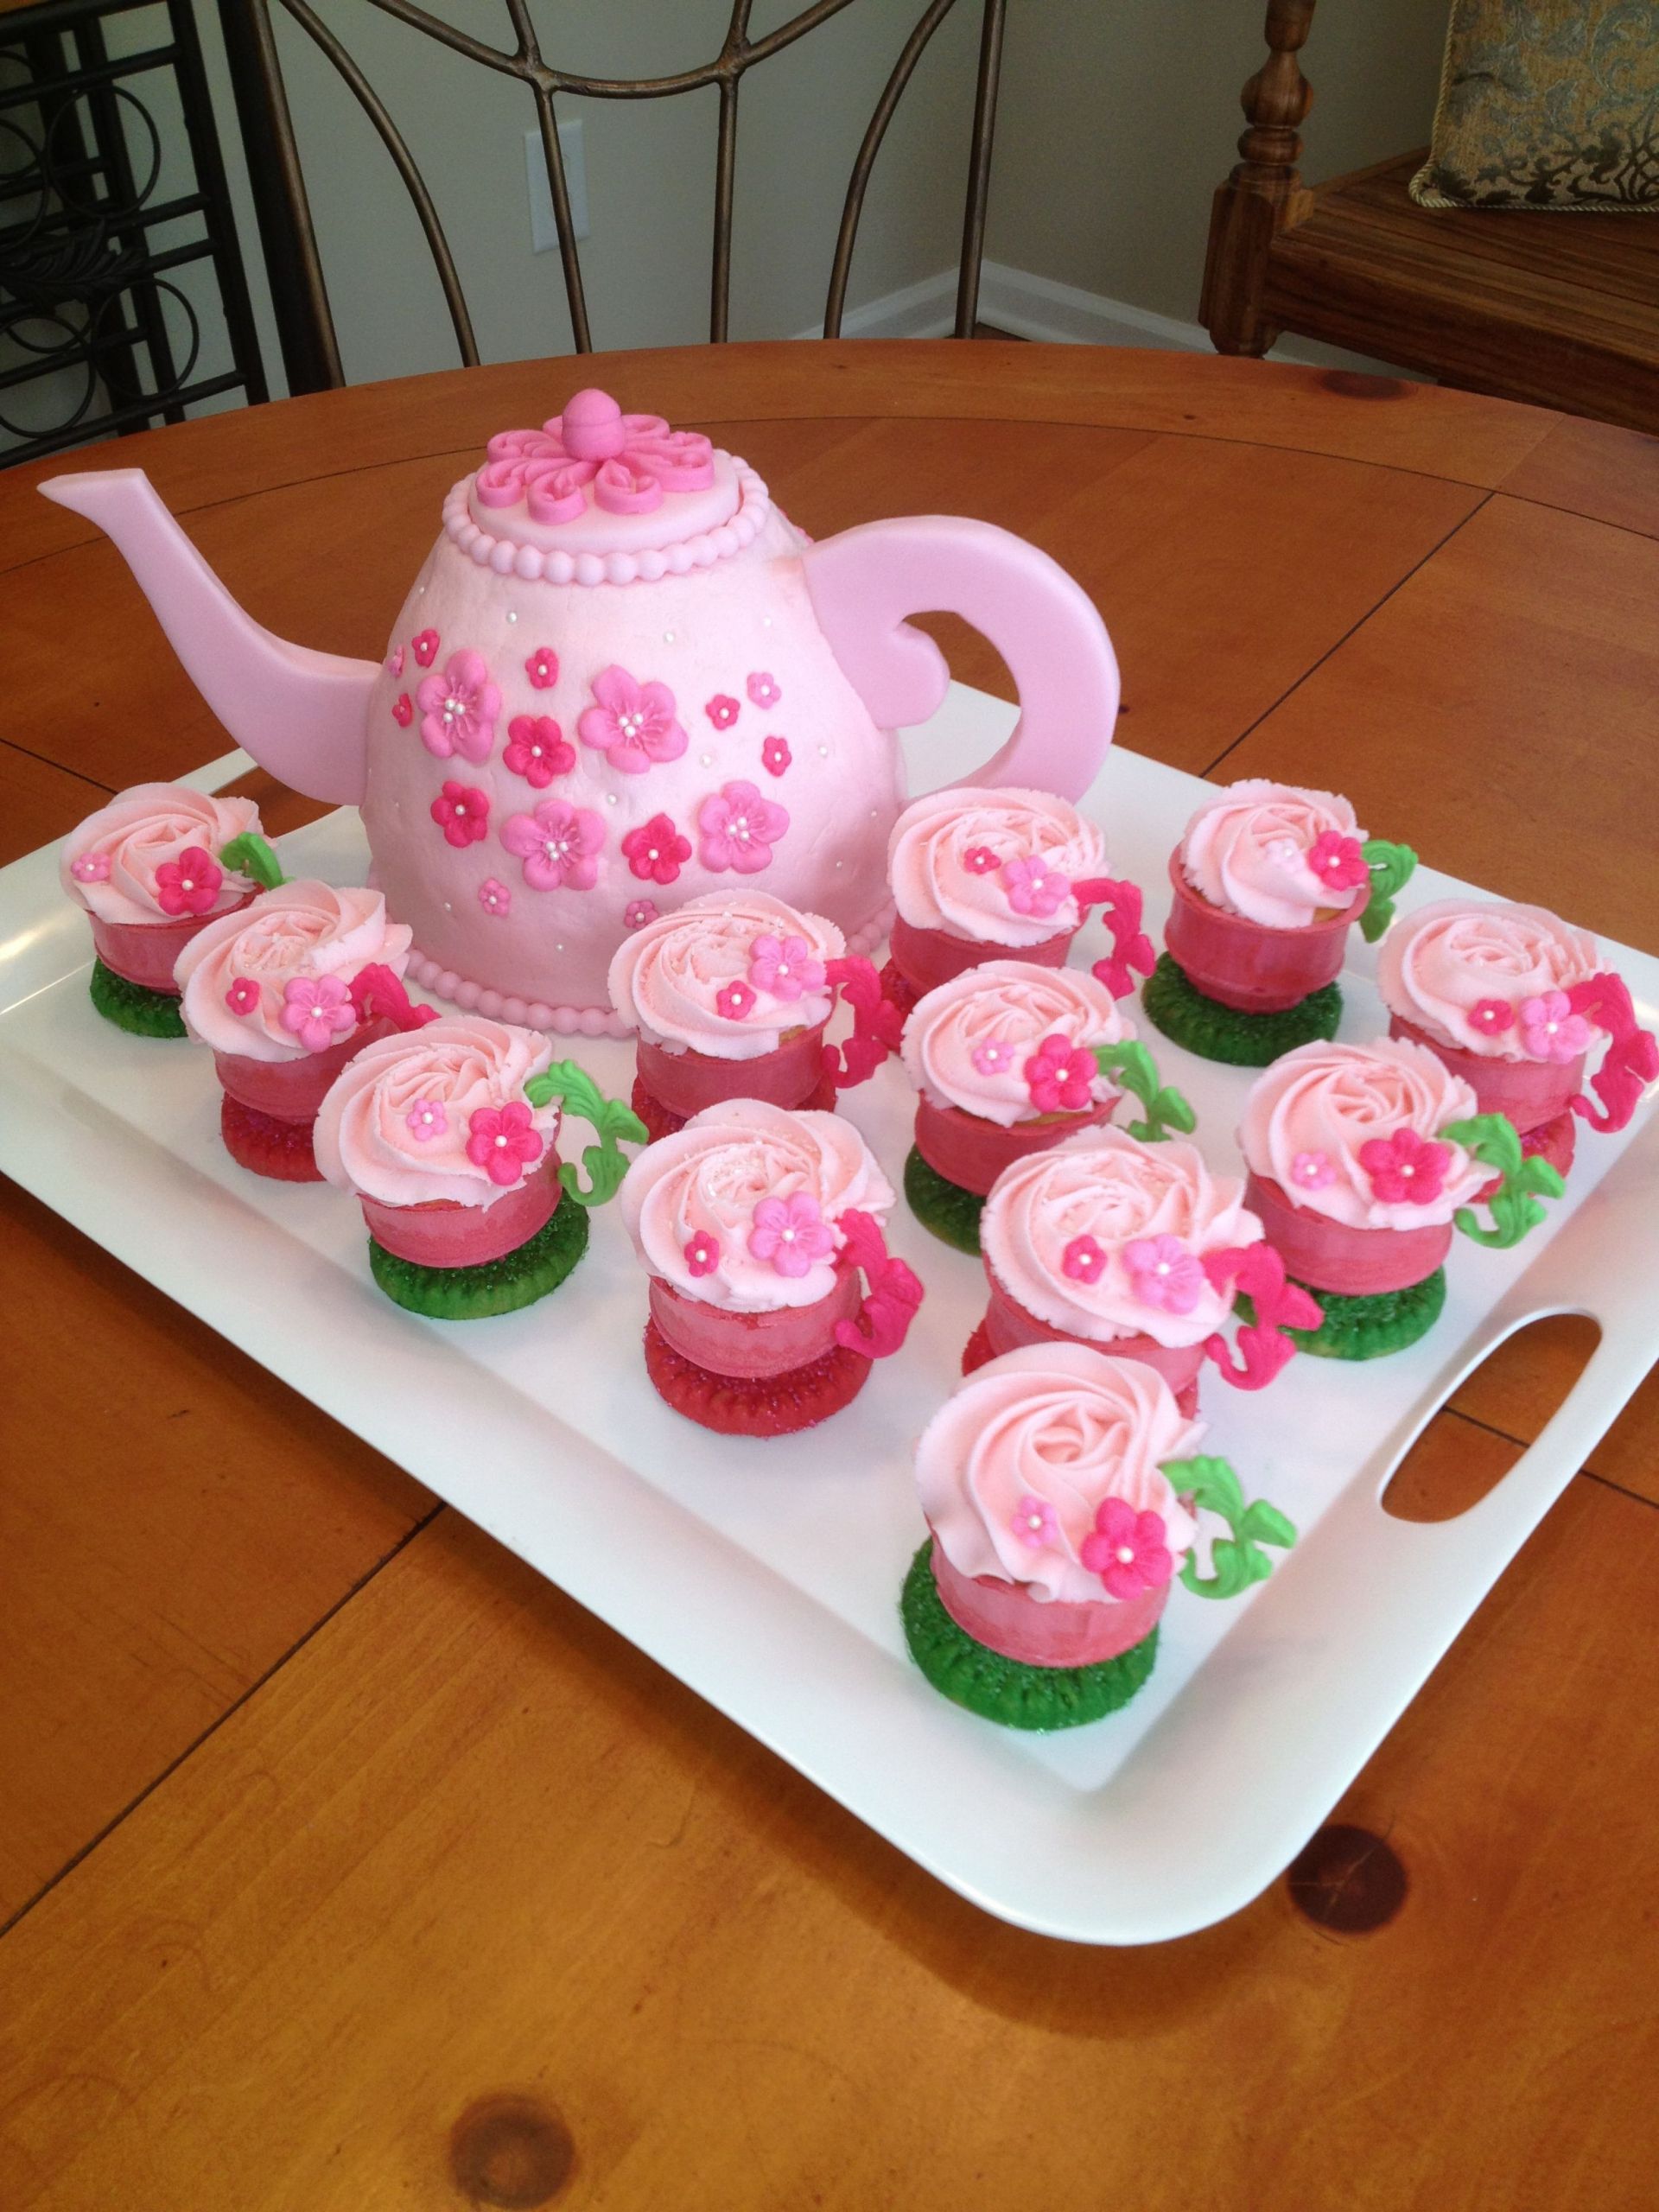 Tea Party Cupcakes Ideas
 Teapot cake with teacup cupcakes The teacups are made